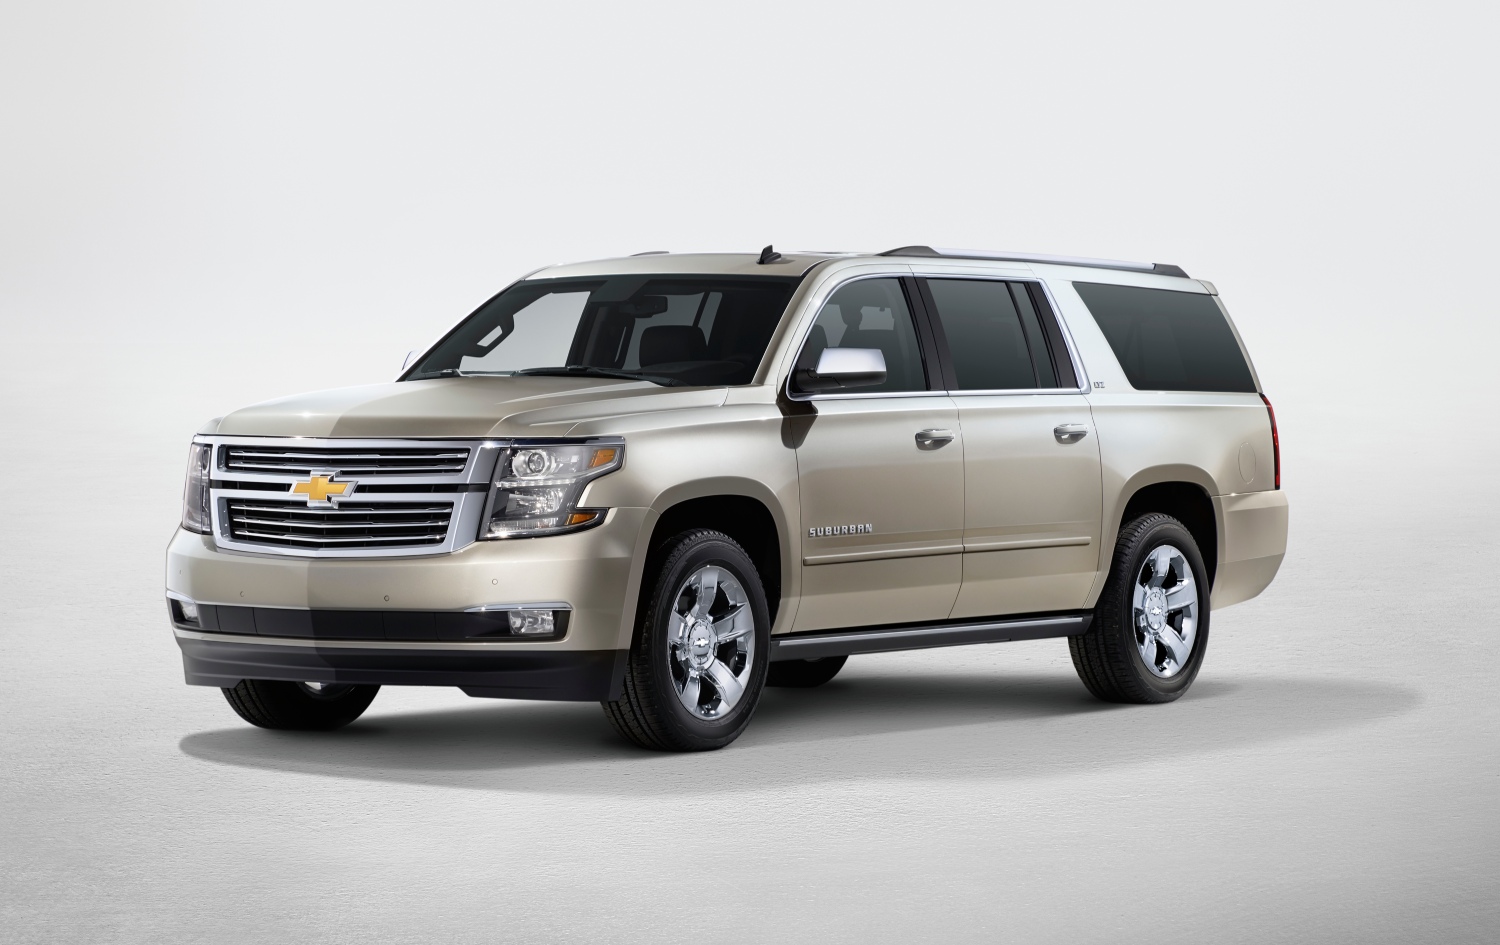 The best used SUVs with room for seven like the Chevrolet Suburban